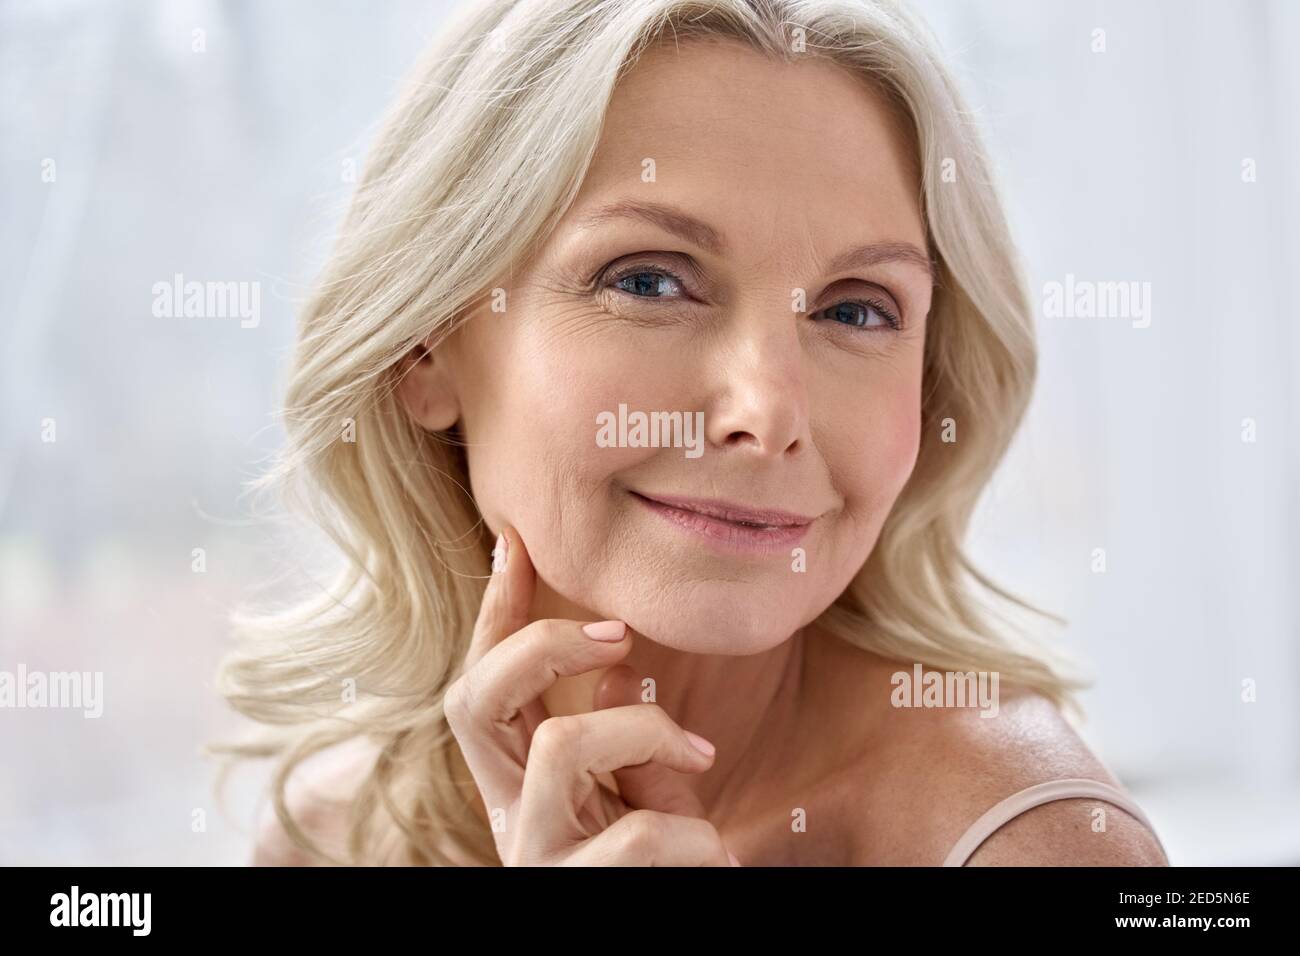 Smiling middle aged blonde woman looking at camera in bathroom. Stock Photo